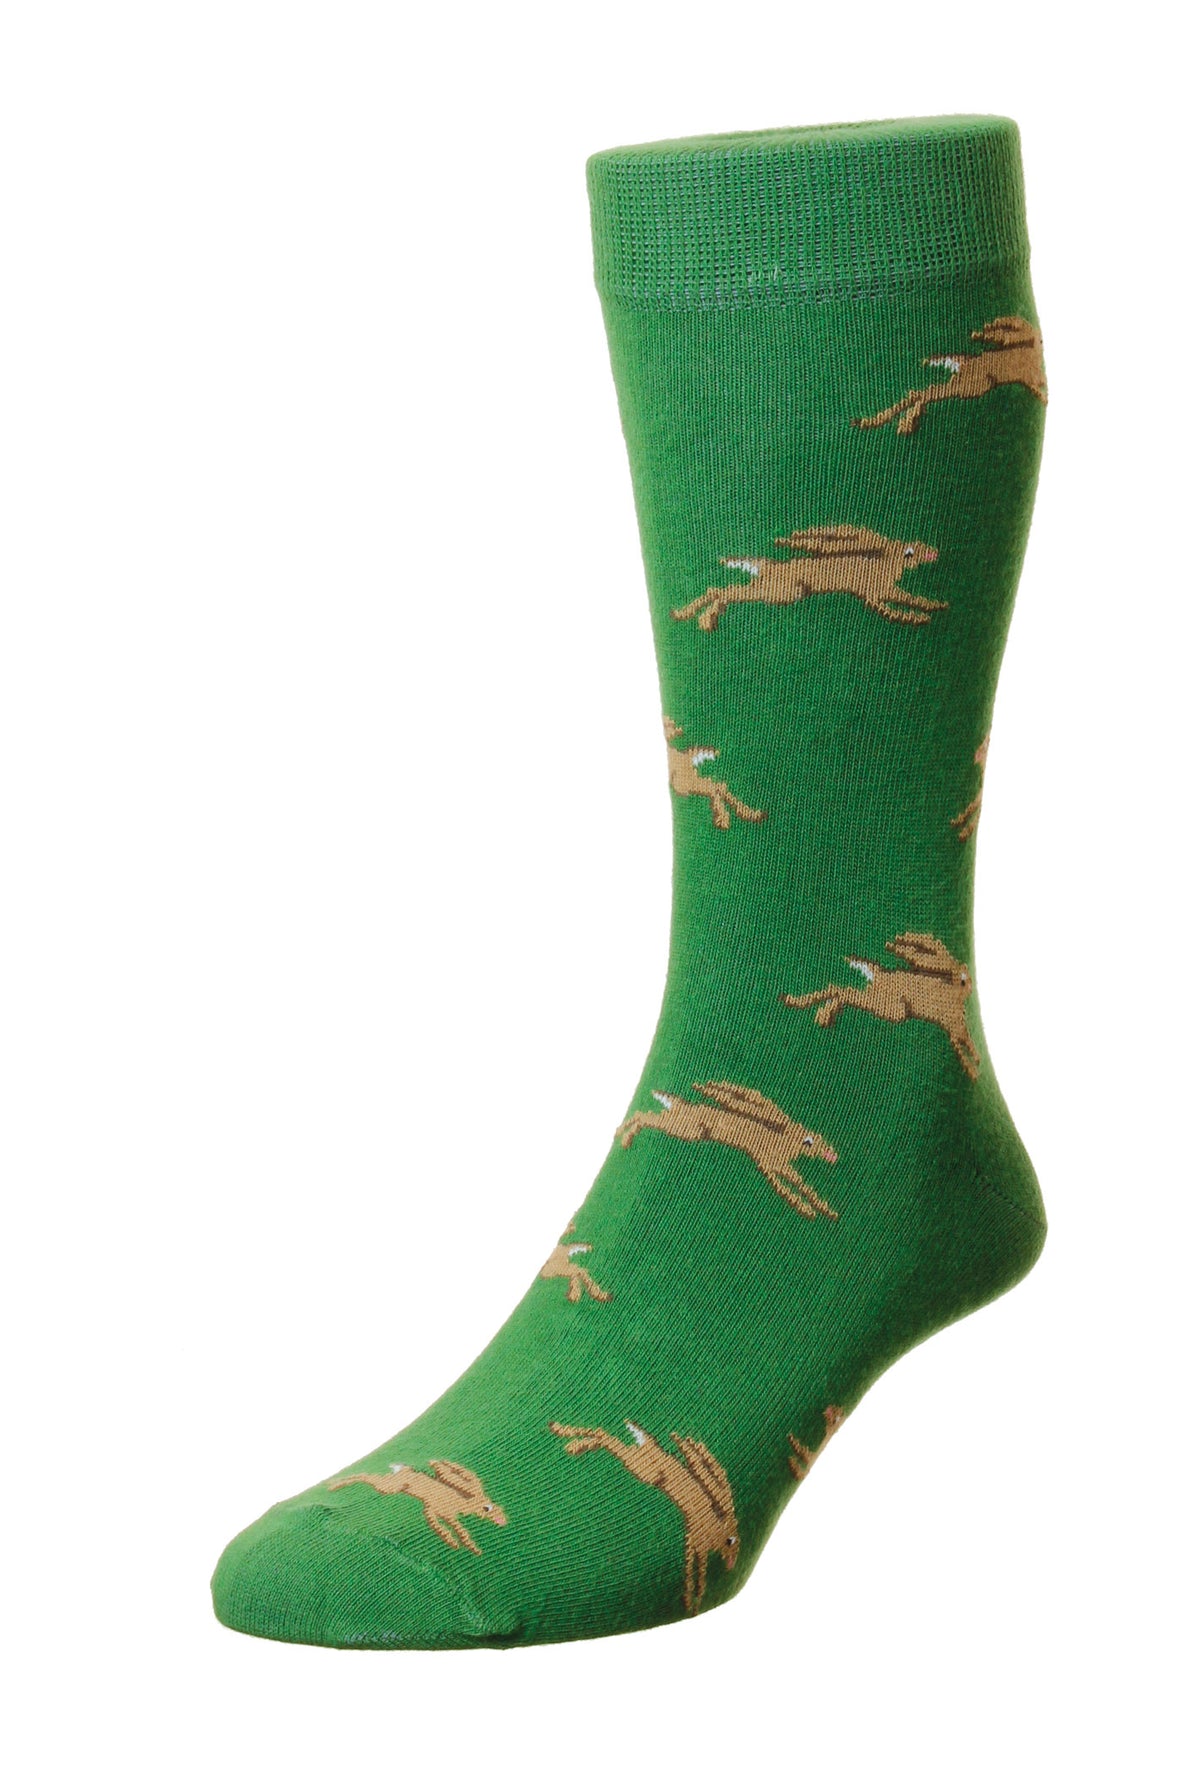 HJ Hall Fable Socks | Tortoise and The Hare - Hollands Country Clothing